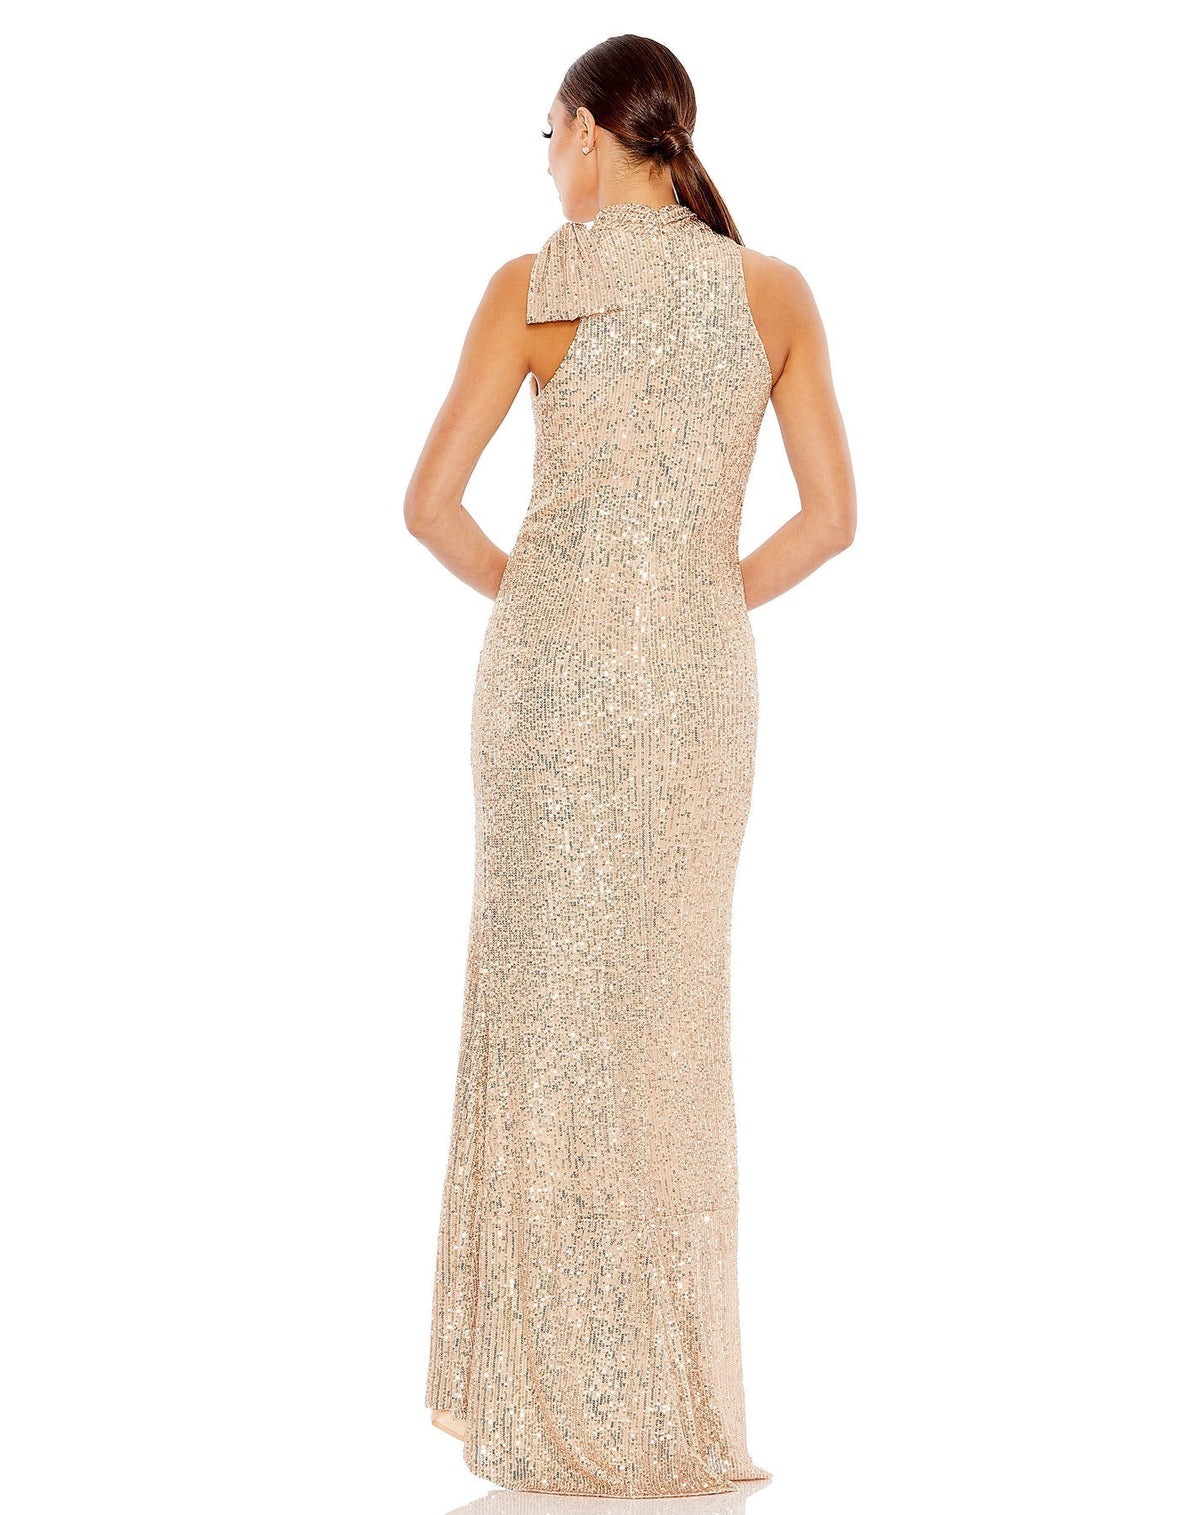 Sequin tie neck column sleeveless gown - rose gold back